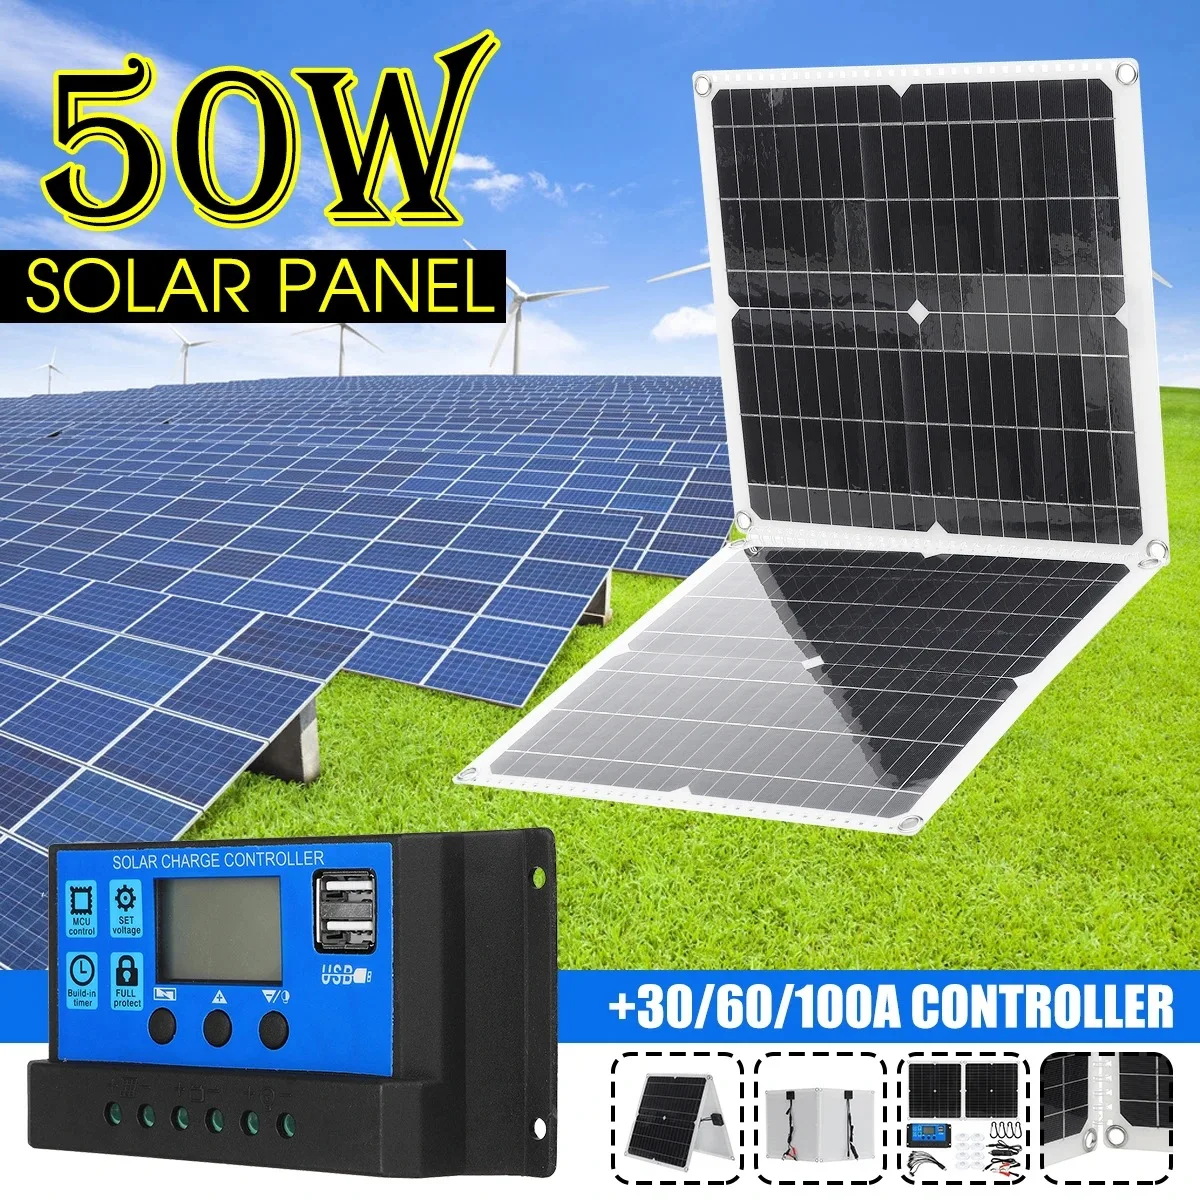 12V 180W Protable Solar Panel Kit 2 USB Charger Port with 30A/60A Solar Charge Controller Off Grid Monocrystalline Module